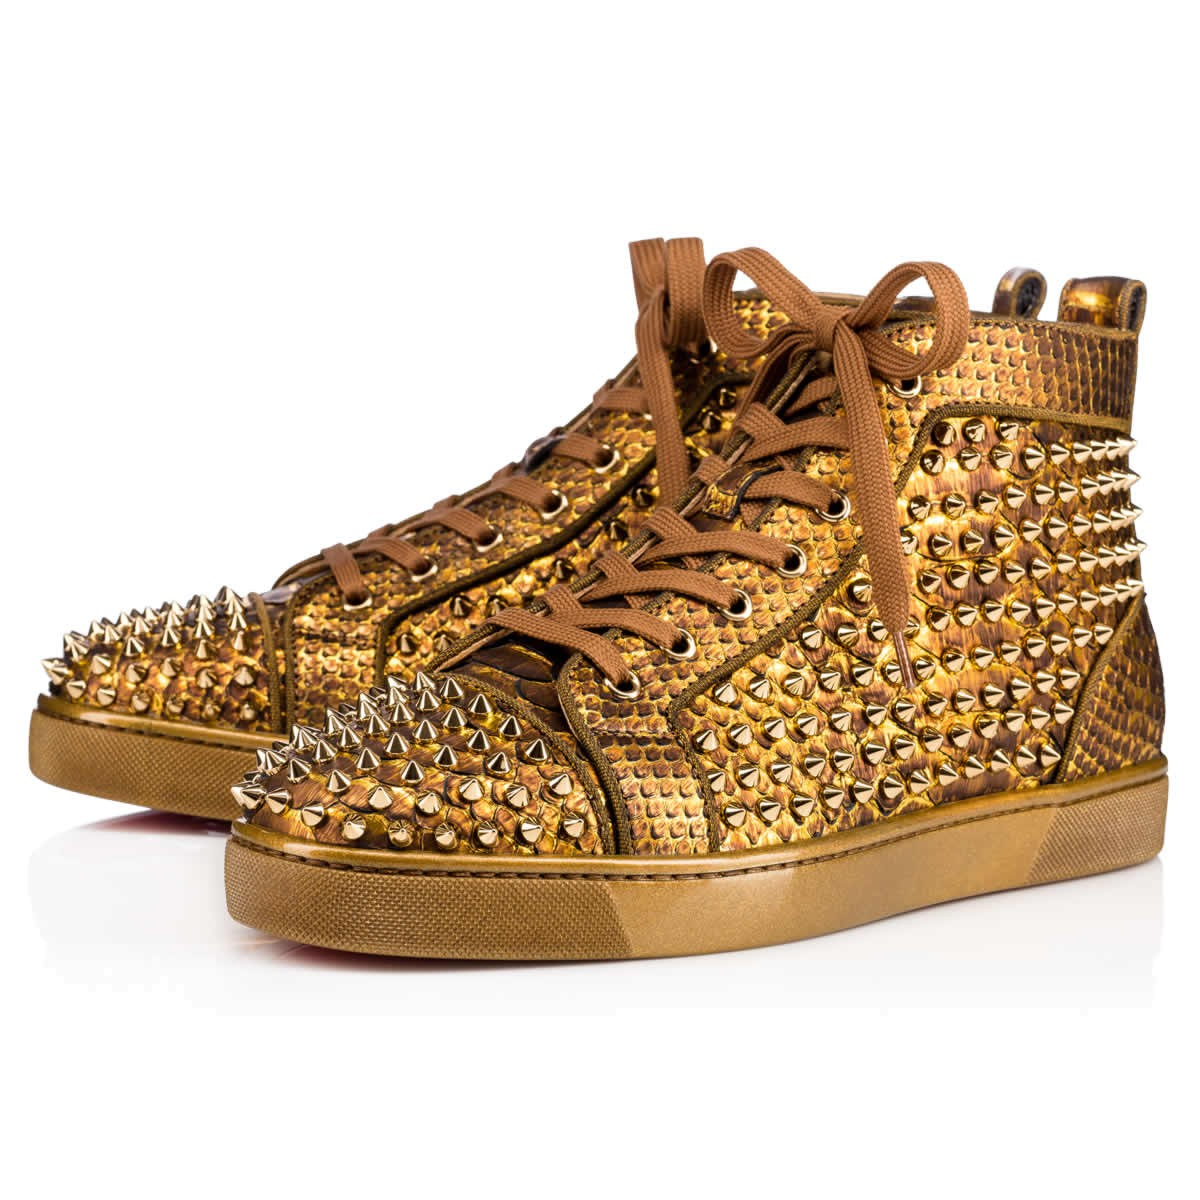 Louis Vuitton Mens Shoes With Spikes | IQS Executive